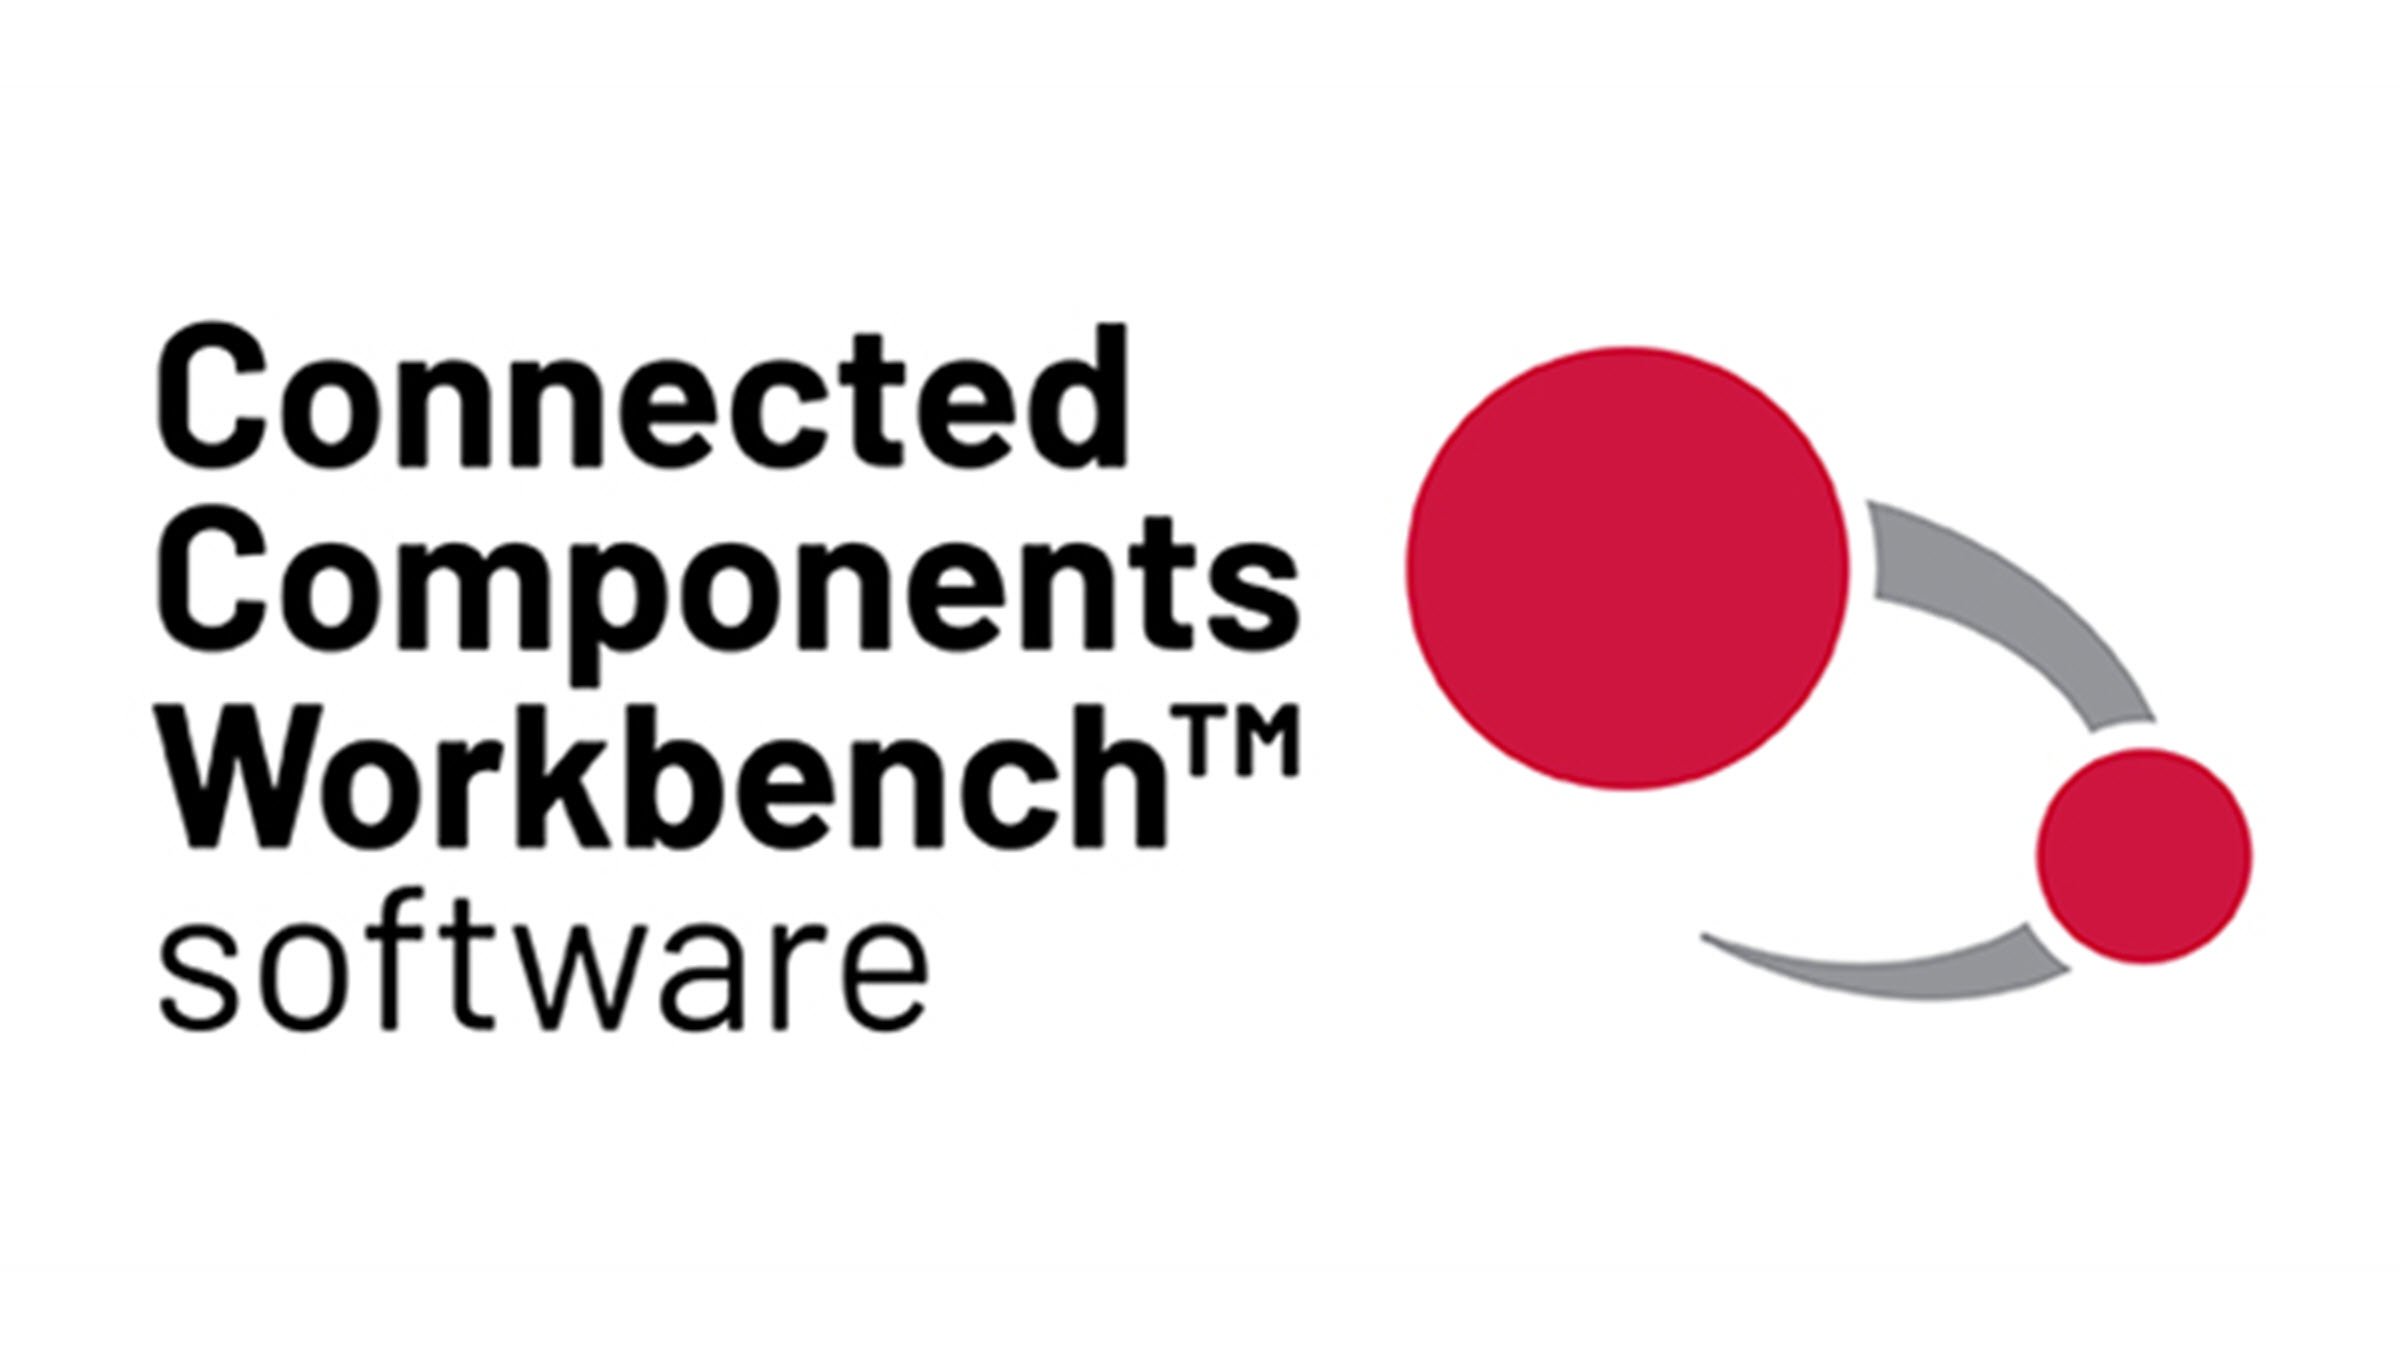 Connected Components Workbench software logo 